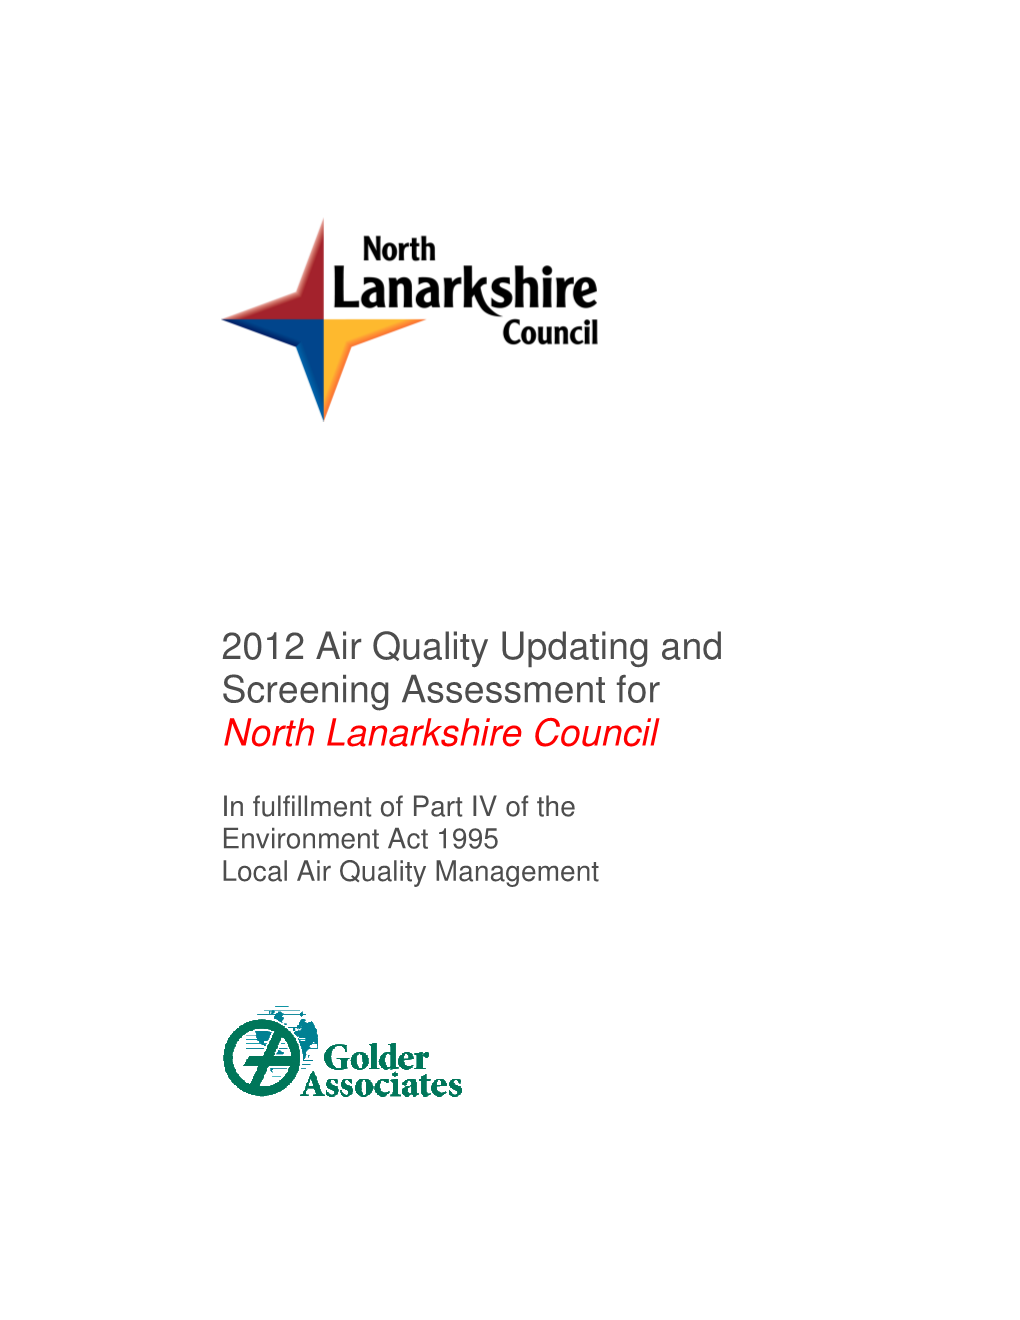 2012 Air Quality Updating and Screening Assessment for North Lanarkshire Council